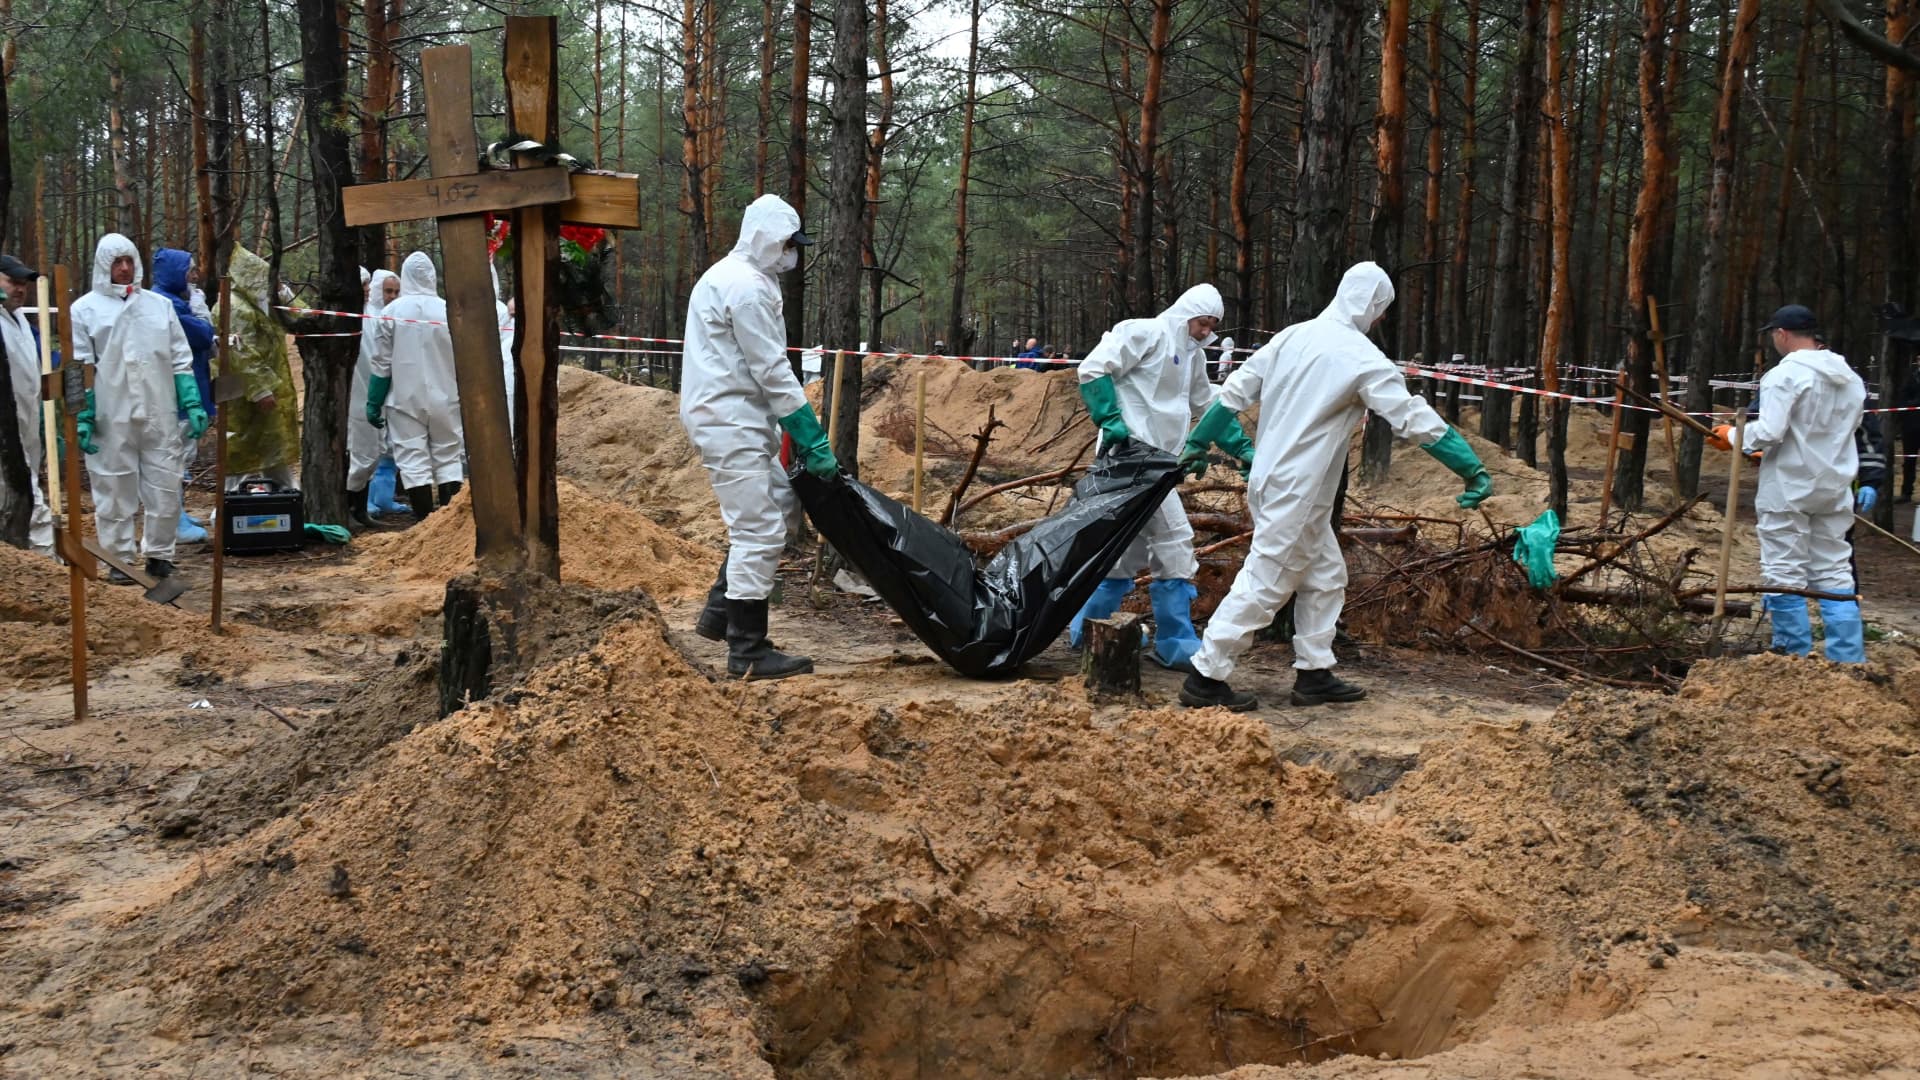 Investigators carry away a body bag in a forest near Izyum, eastern Ukraine, on September 23, 2022, where Ukrainian investigators have uncovered more than 440 graves after the city was recaptured from Russian forces, bringing fresh claims of war atrocities.